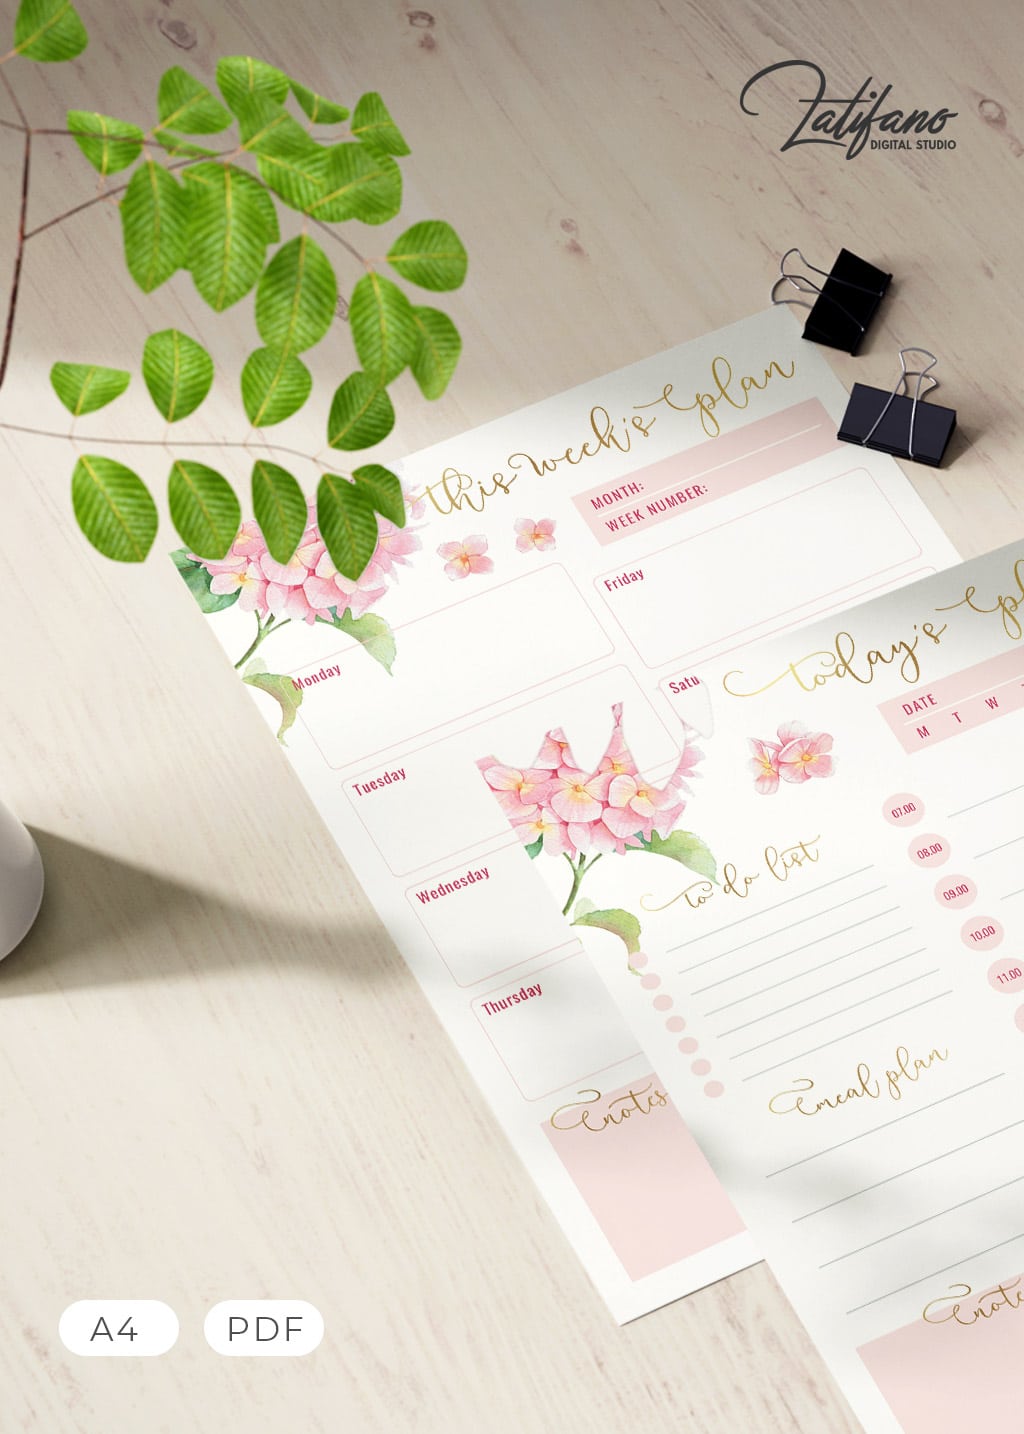 Printable daily planner for women